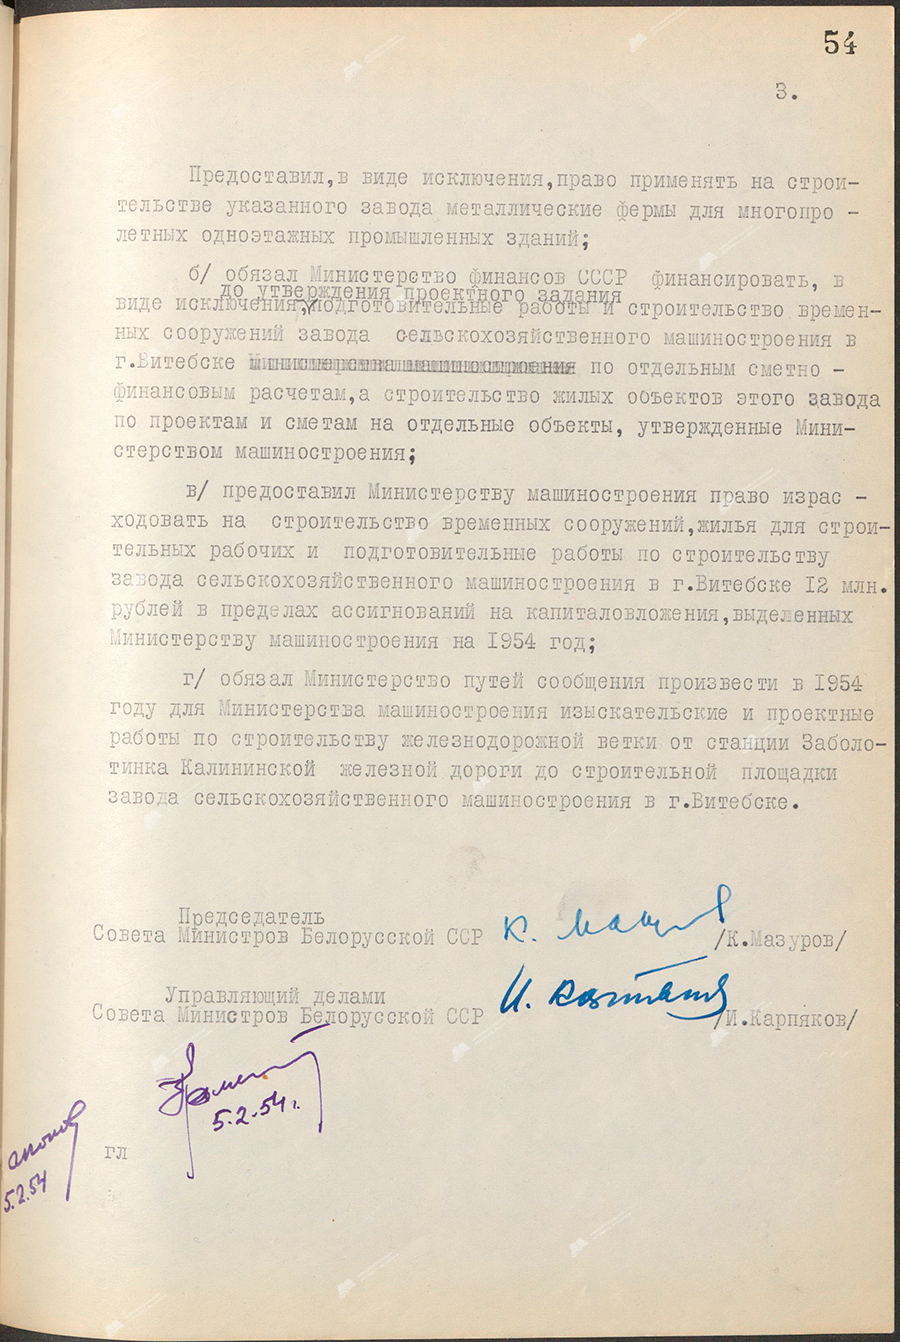 Resolution No. 93 of the Council of Ministers of the Byelorussian SSR «On the construction of an agricultural machinery plant of the Ministry of Mechanical Engineering in Vitebsk»-с. 1